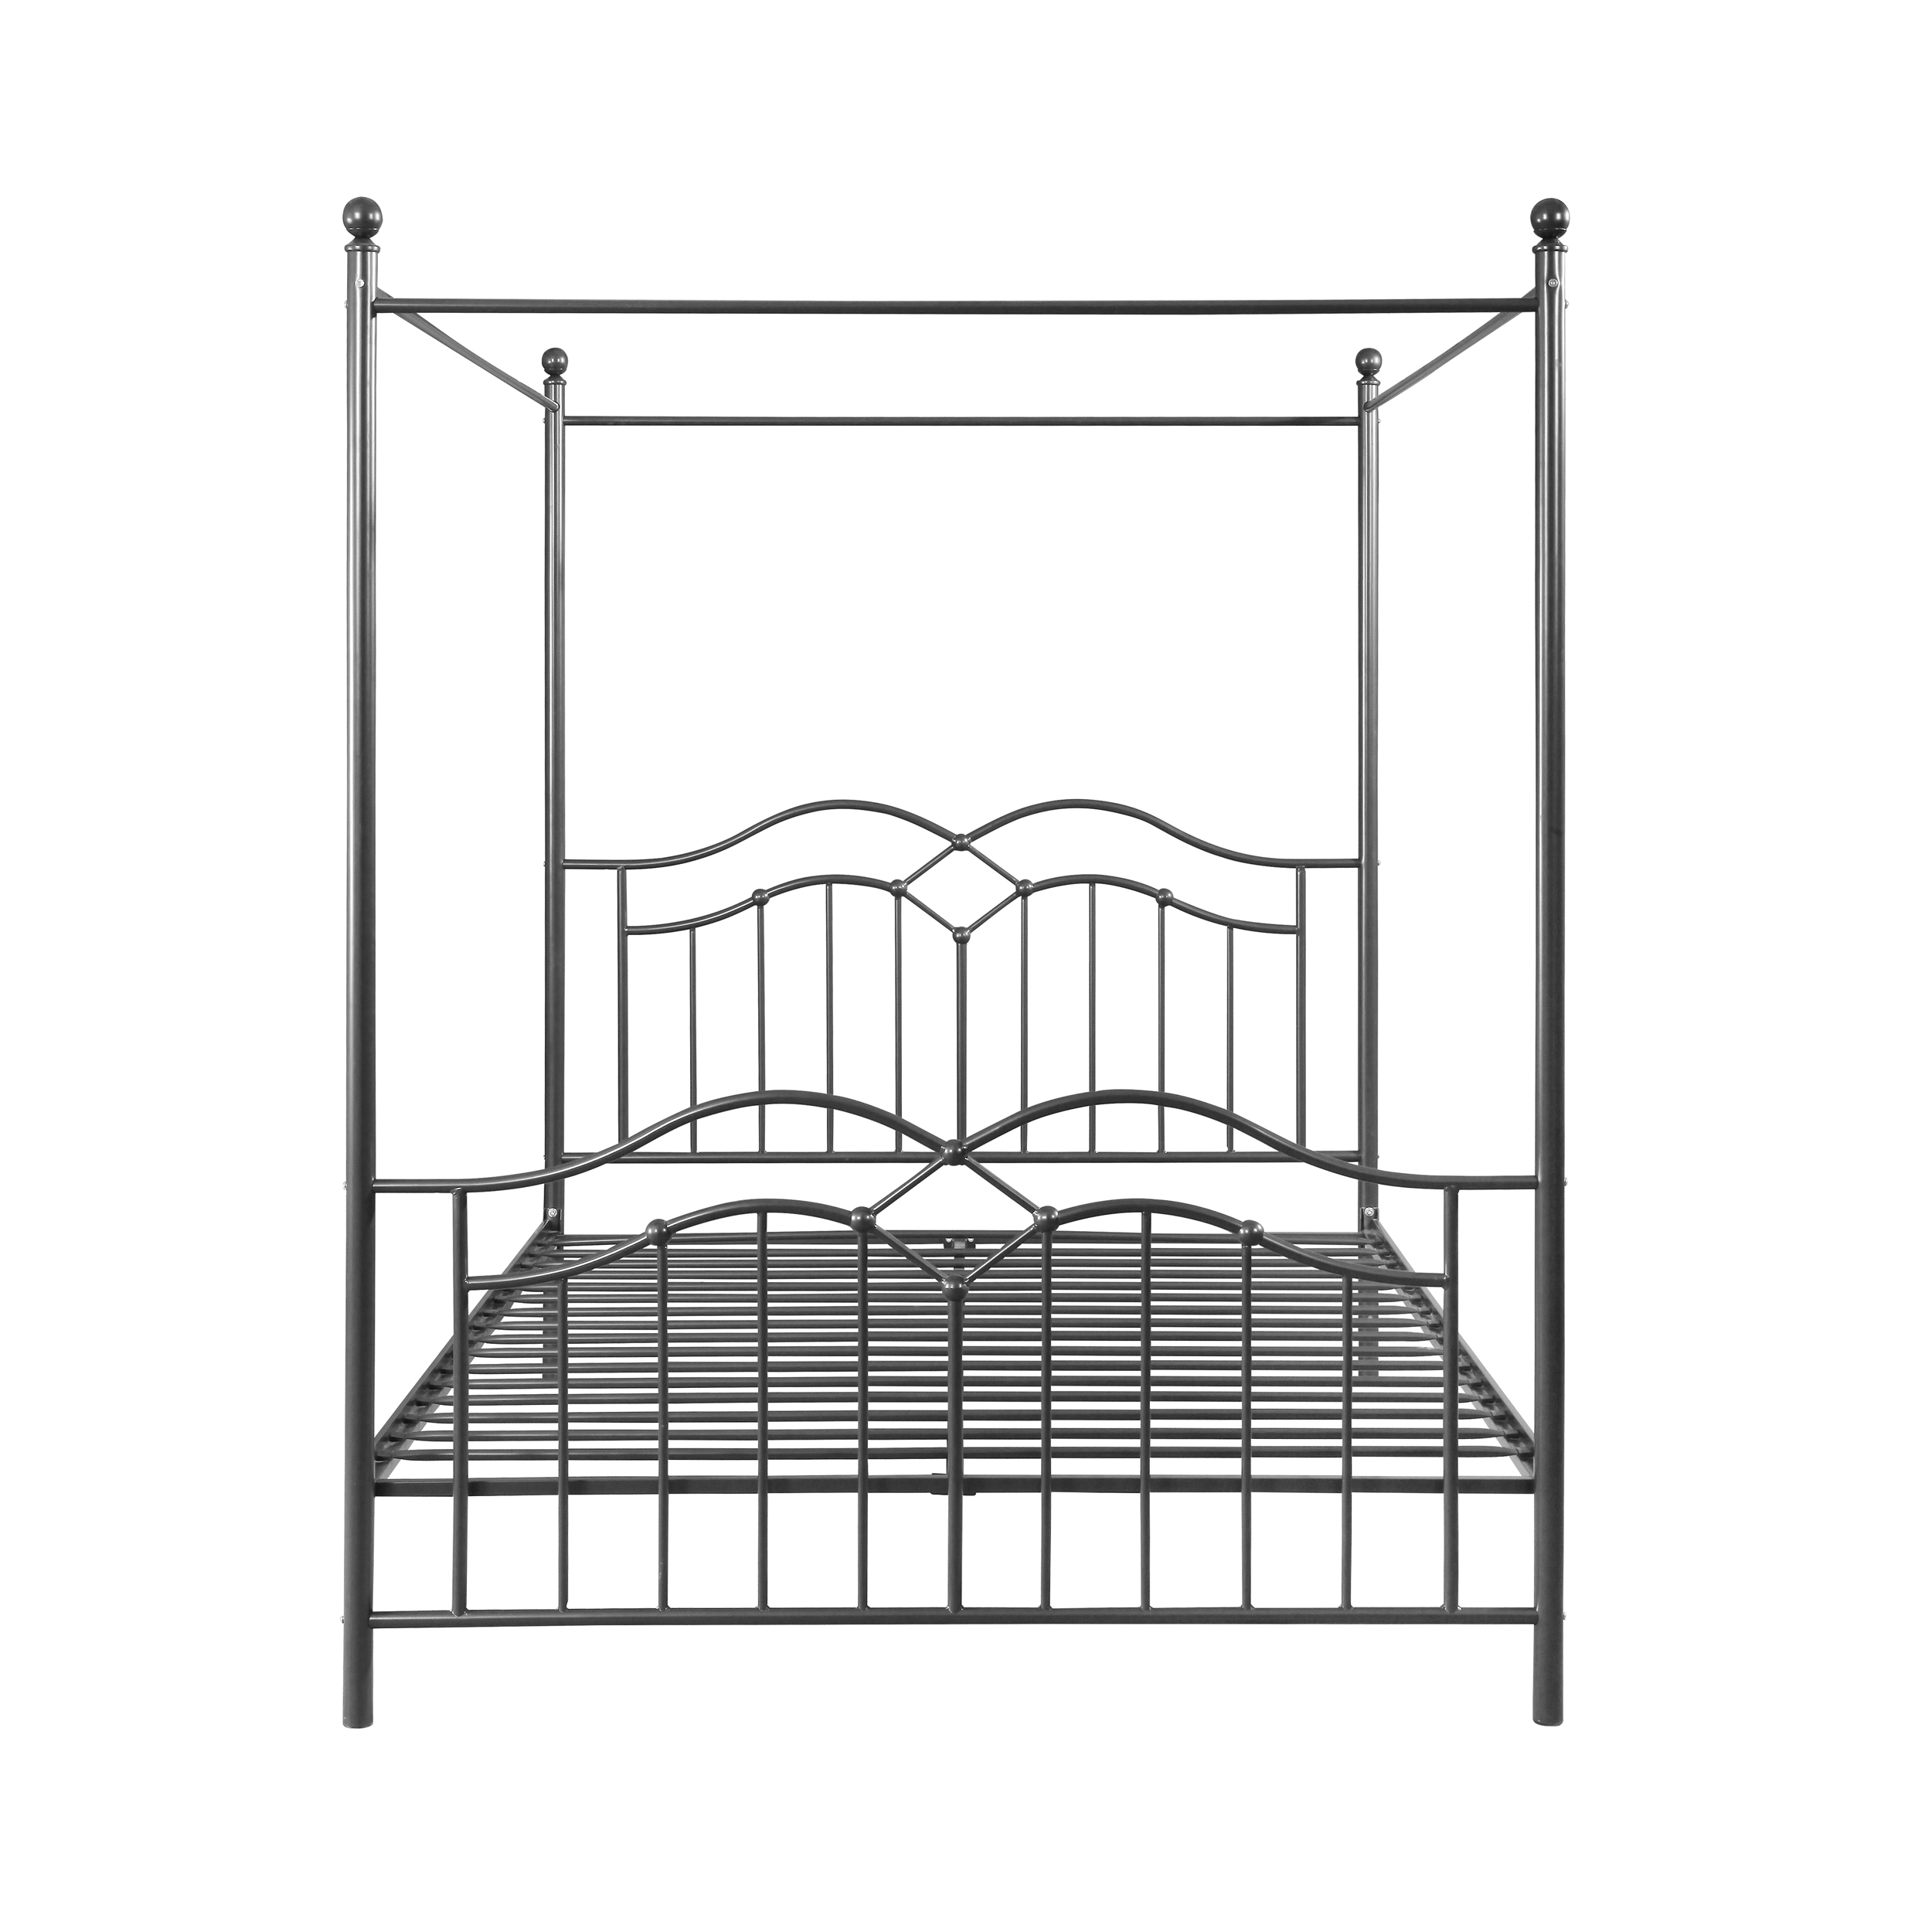 Noble House Selene Traditional Iron Canopy Queen Bed Frame, Charcoal Gray - image 5 of 7